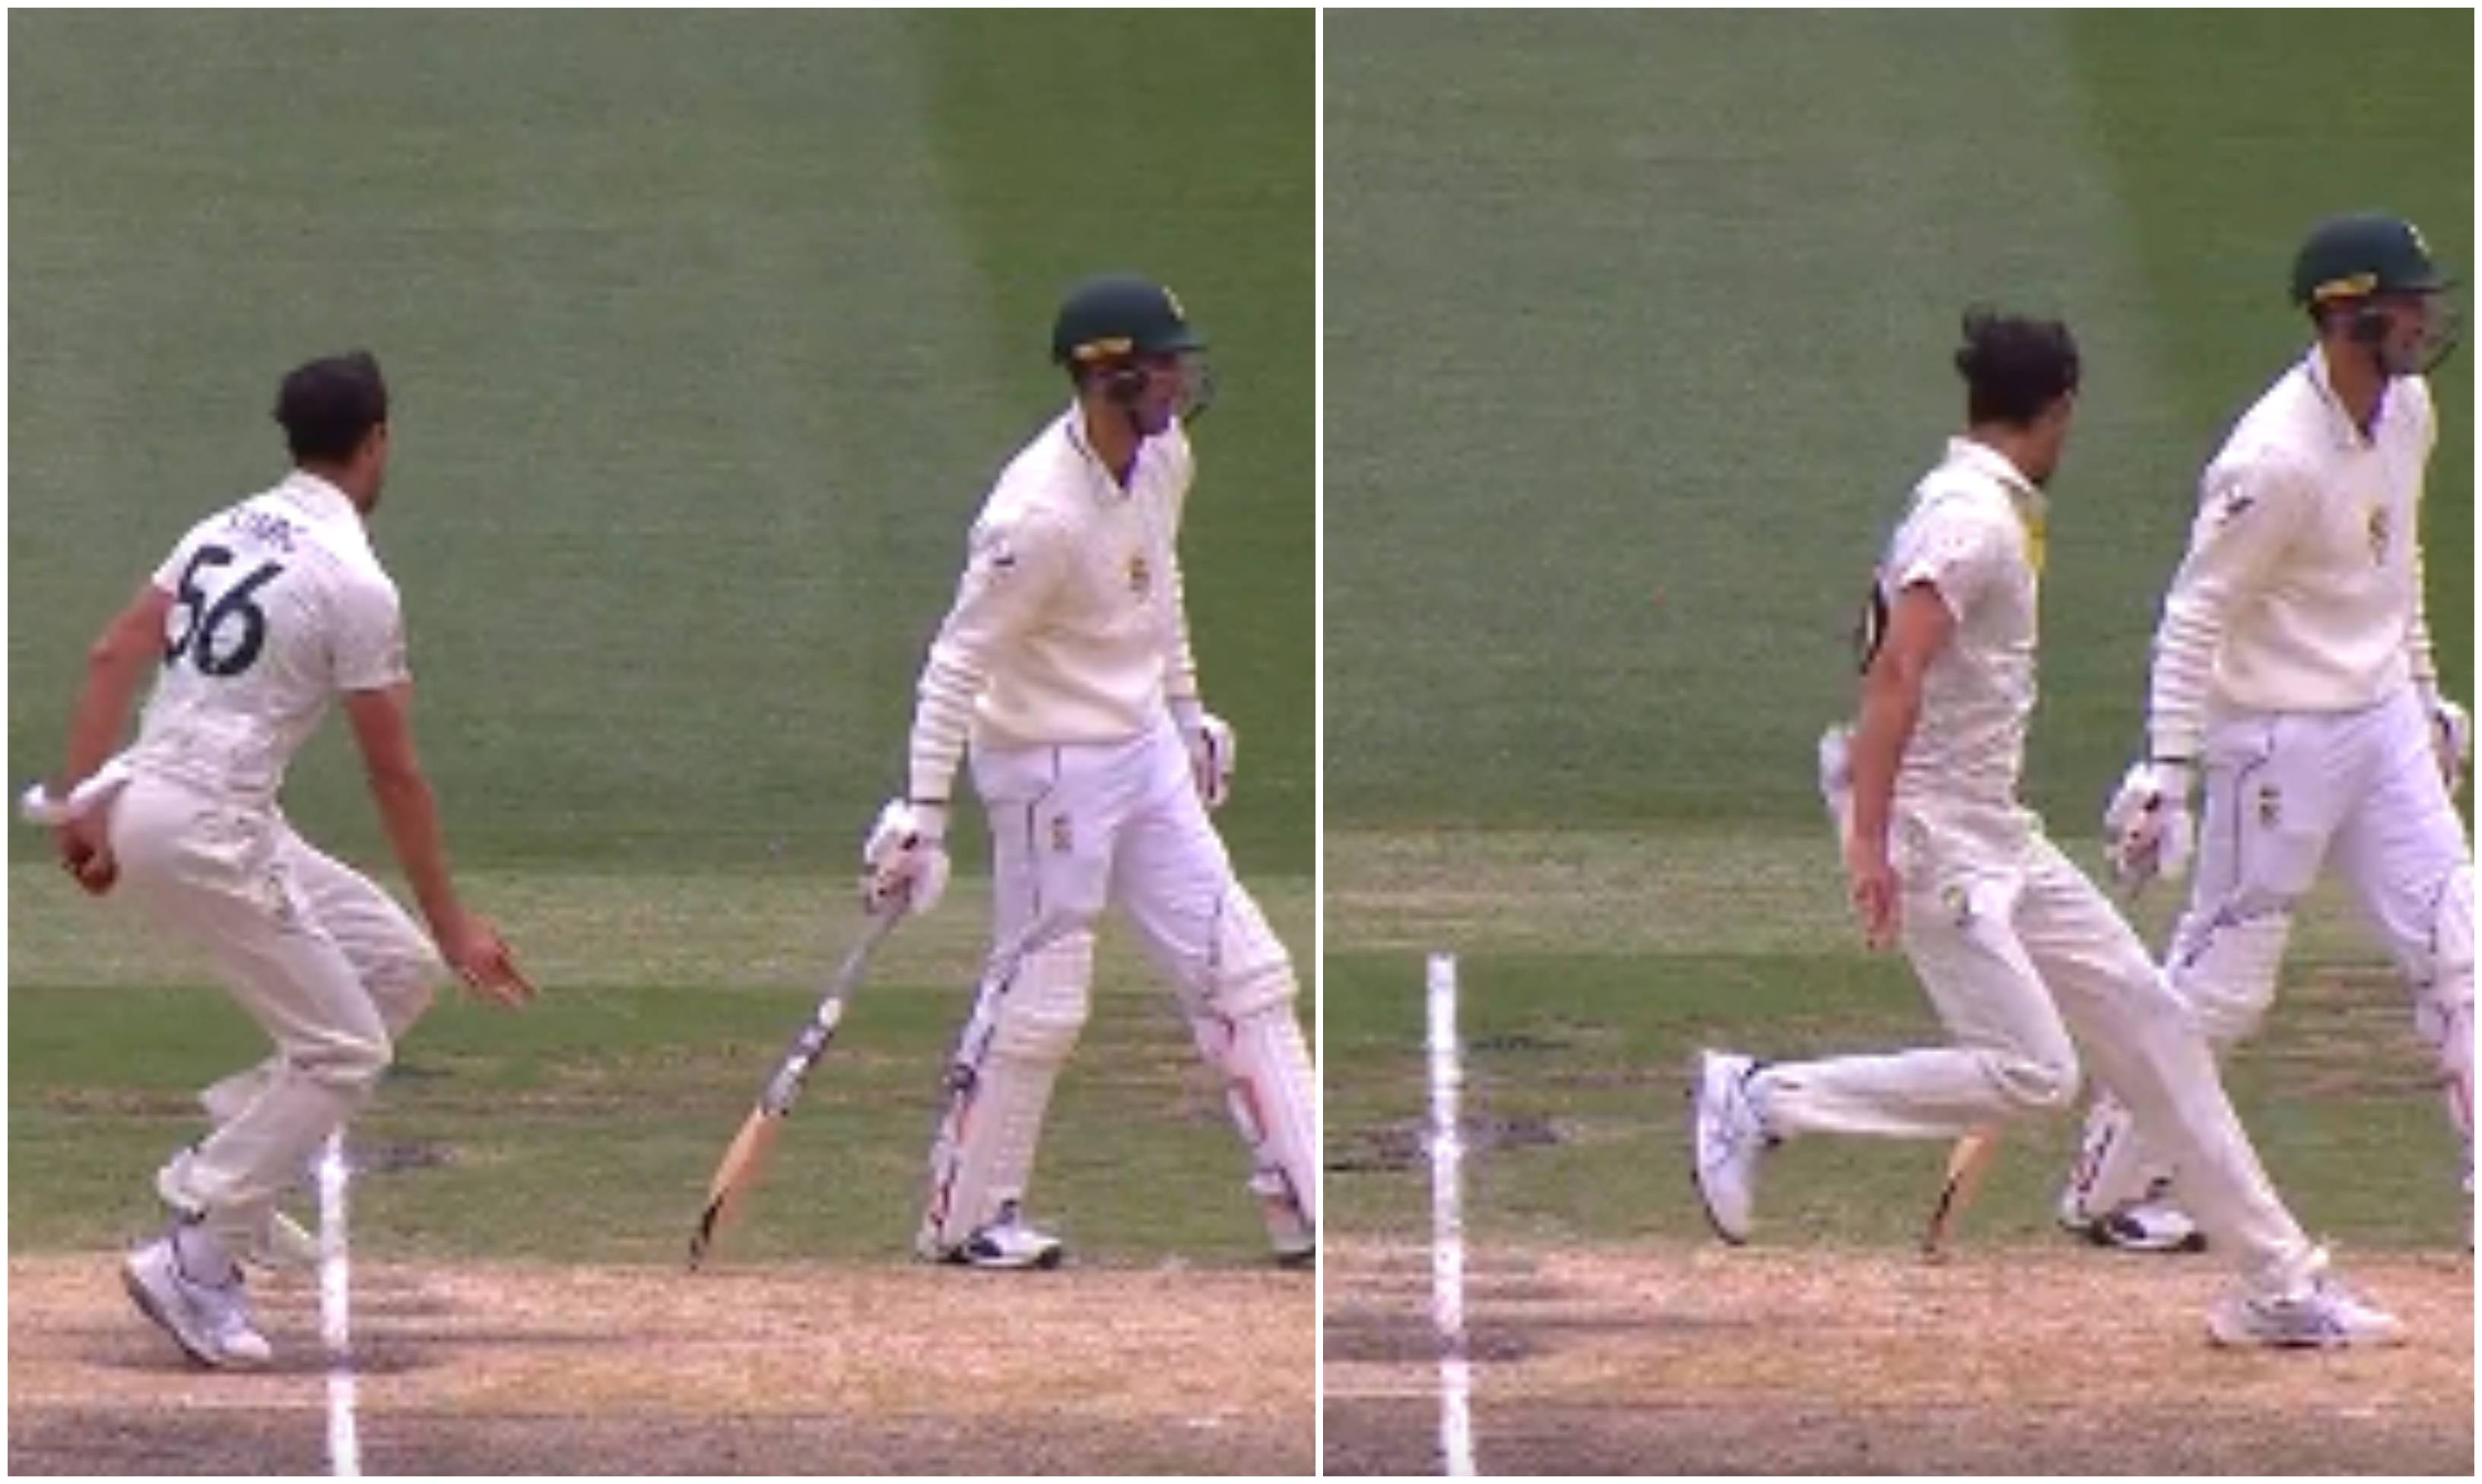 The South African batter was taking an unfair advantage | Screengrab